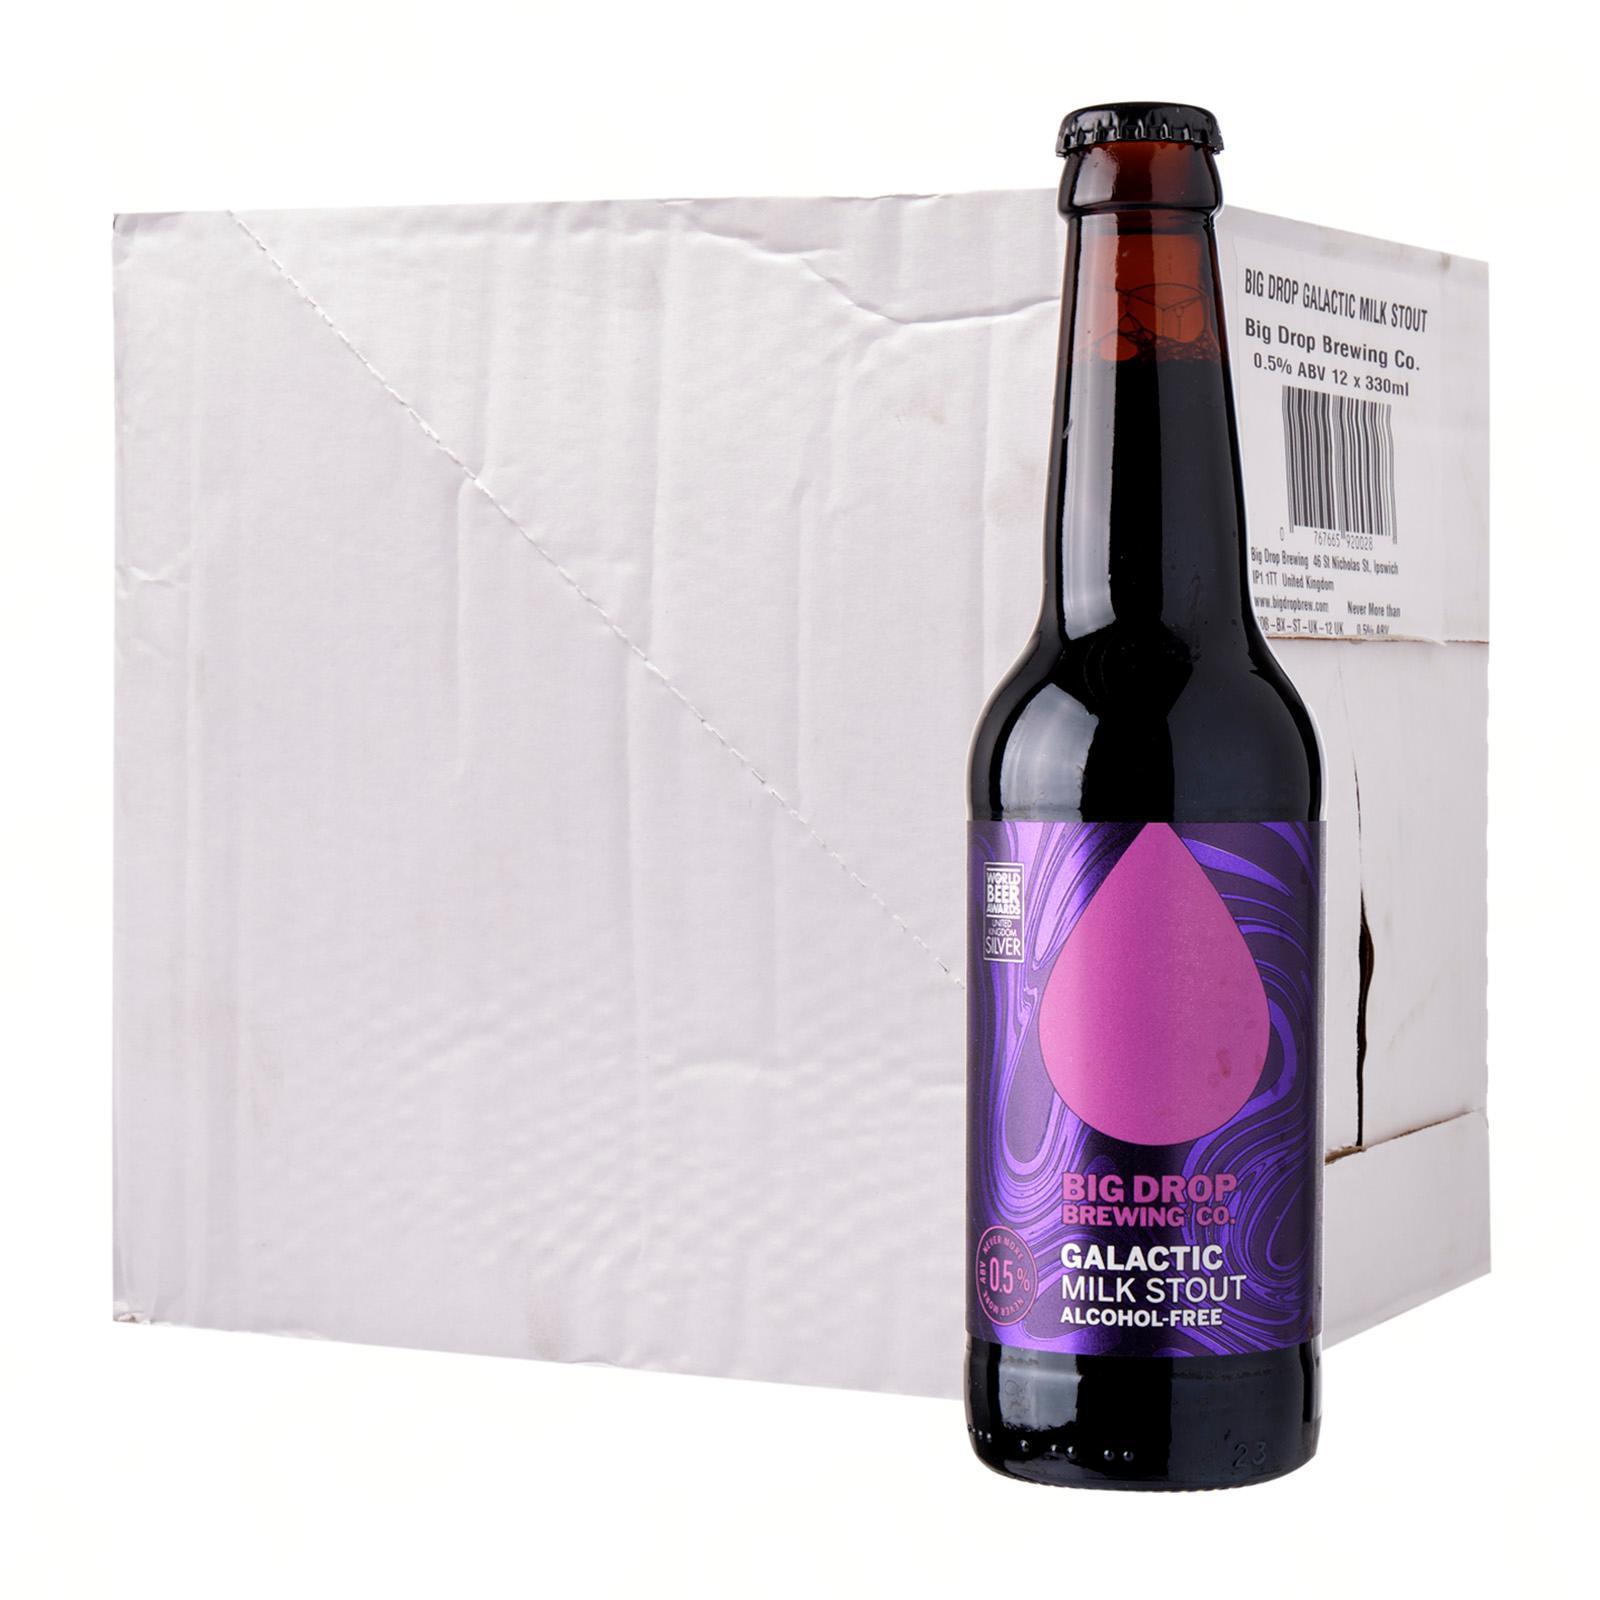 Unponened bottle of Big Drop Galactic Milk Stout with a cardboard package